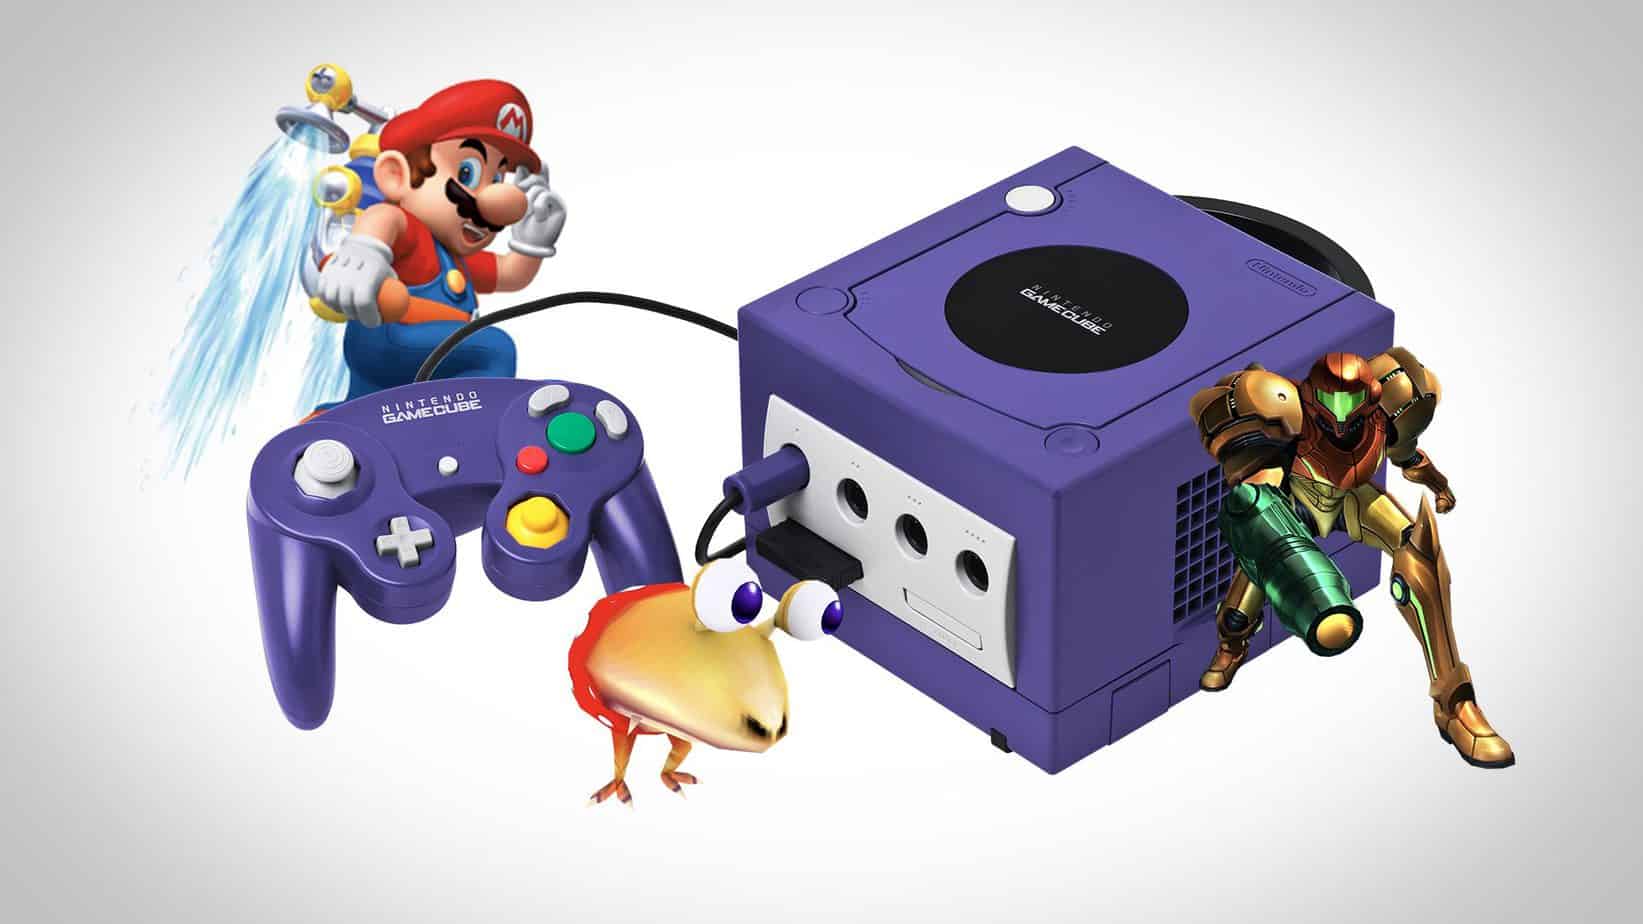 where to buy gamecube games